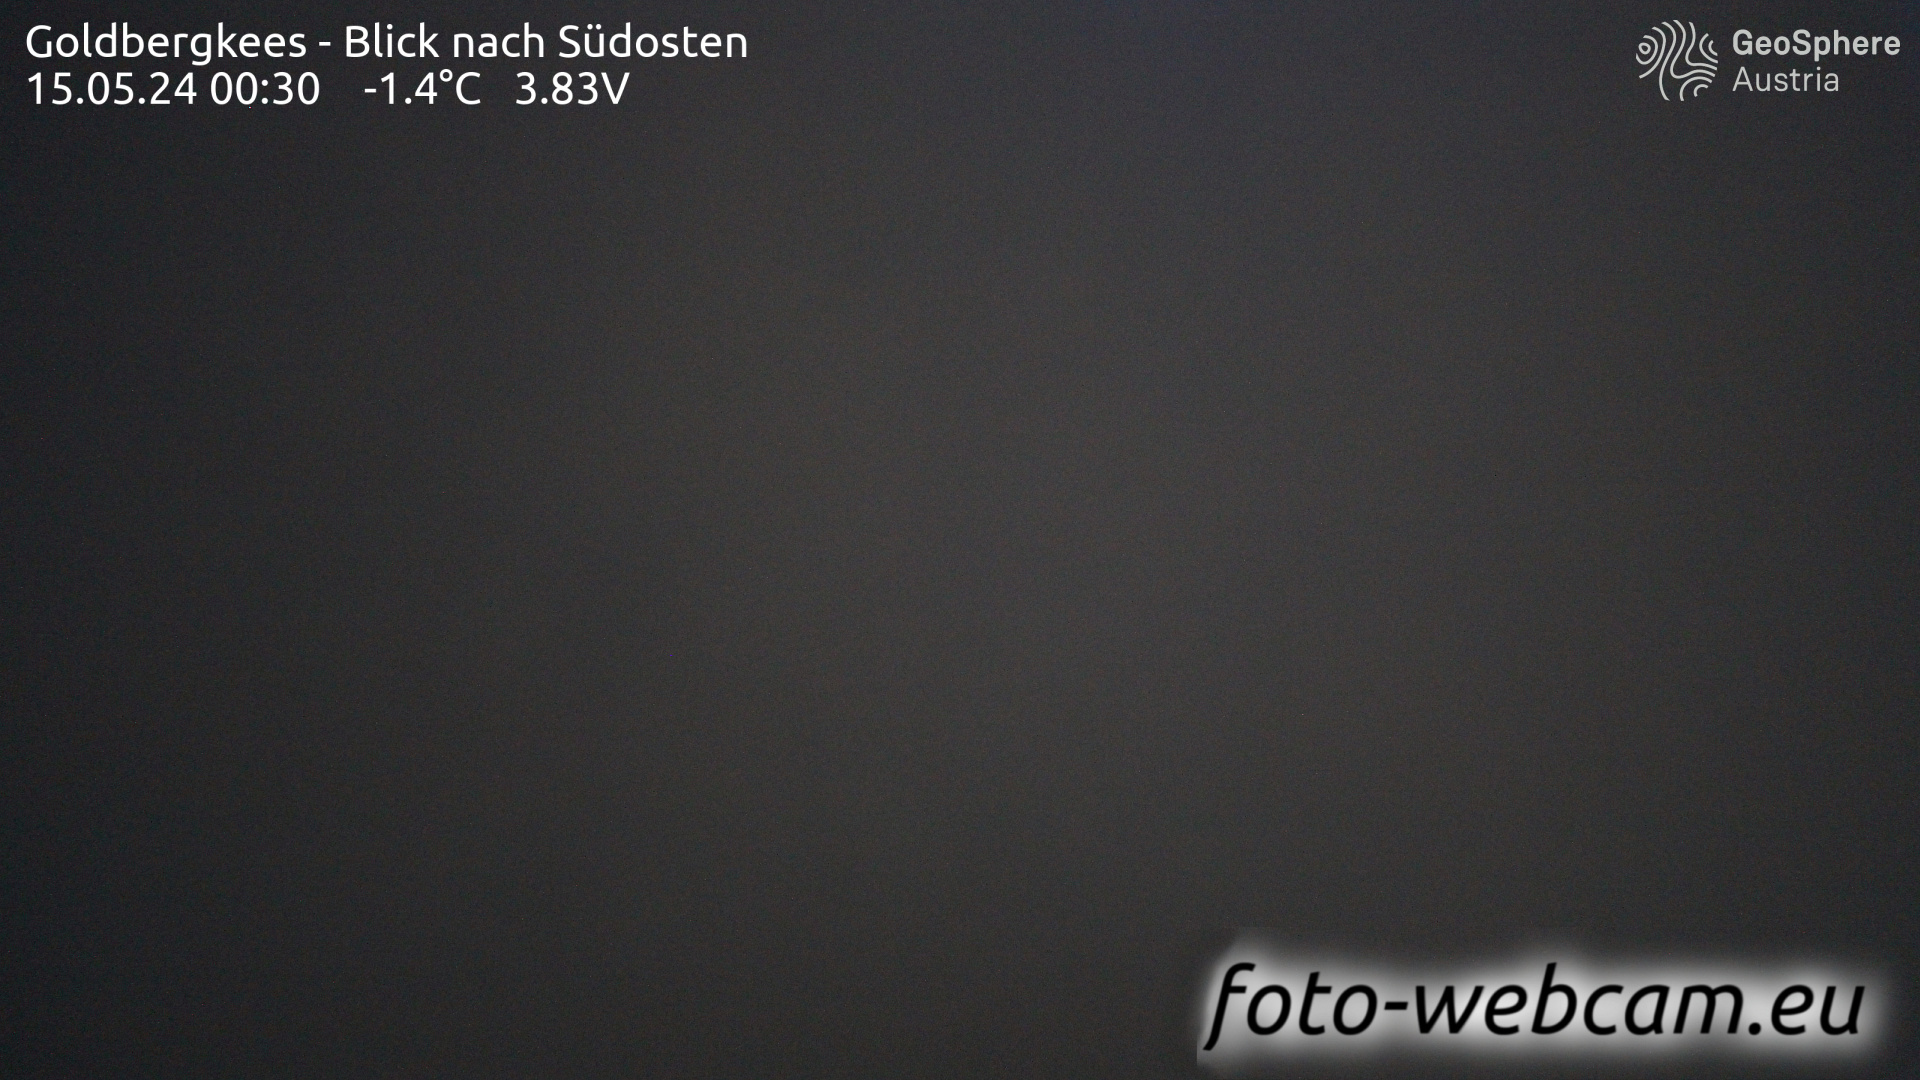 Hoher Sonnblick Thu. 00:55